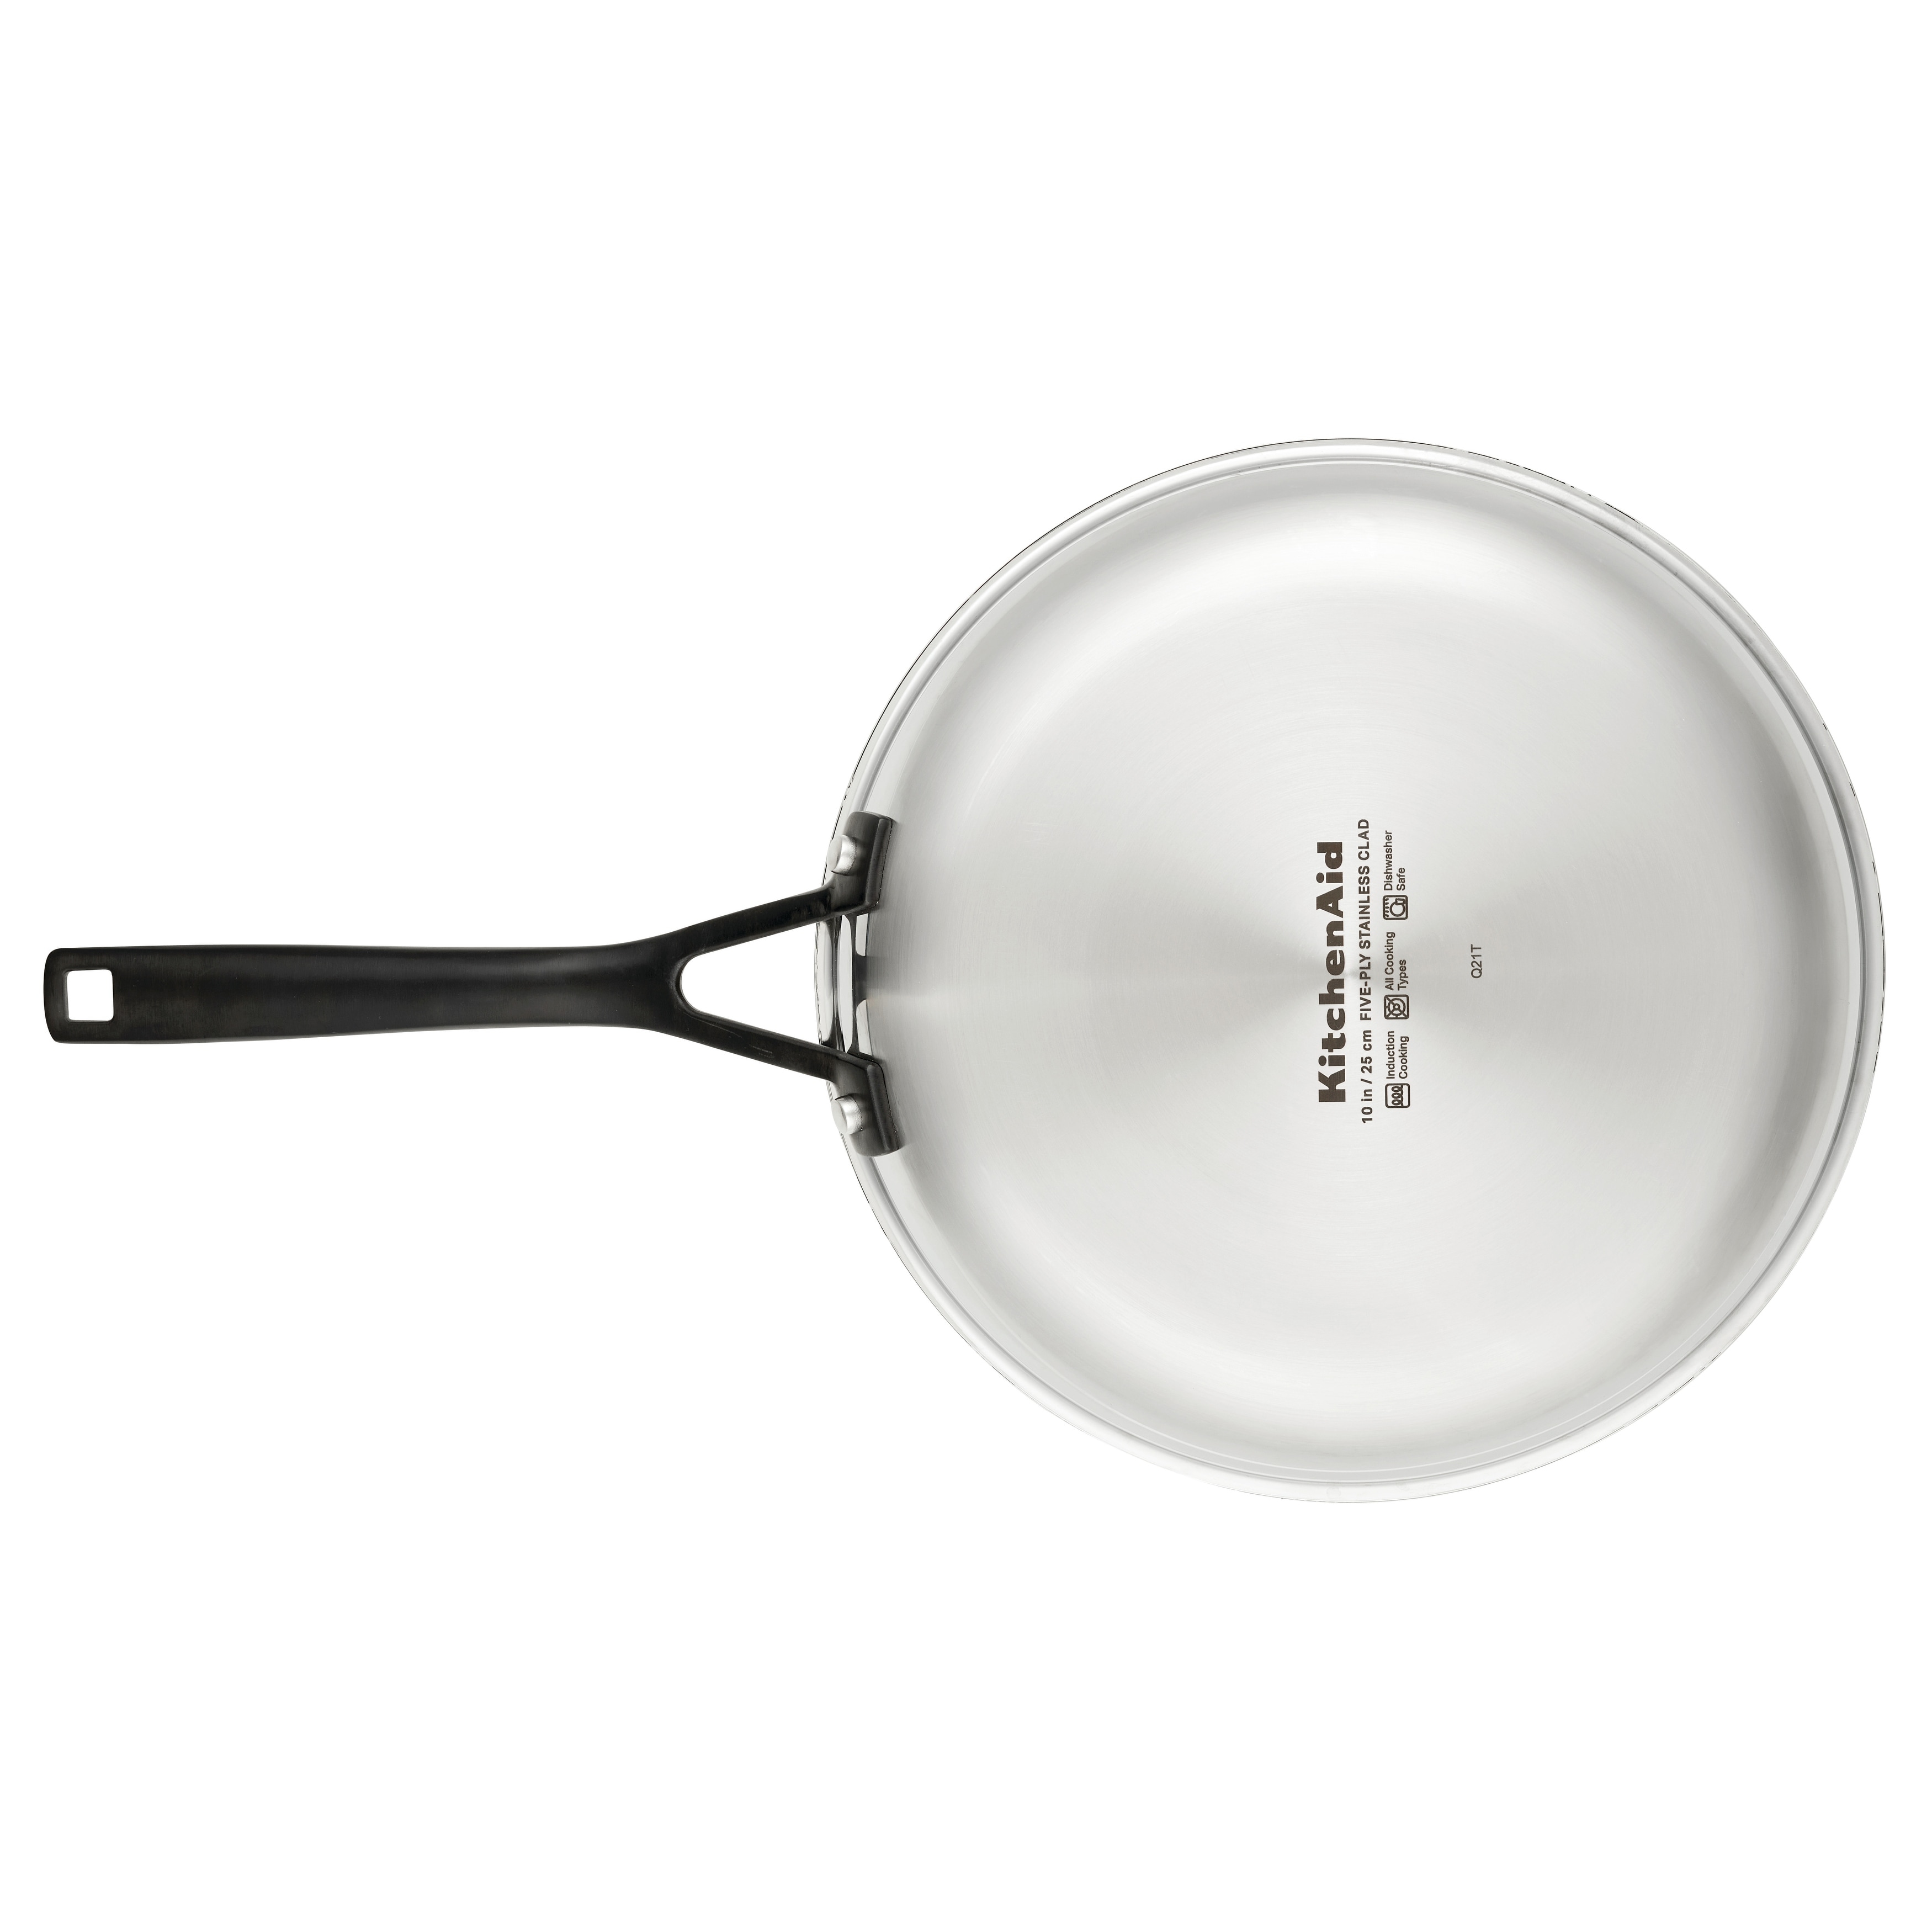 KitchenAid 5-Ply Clad Polished Stainless Steel Fry Pan/Skillet, 12.25 Inch